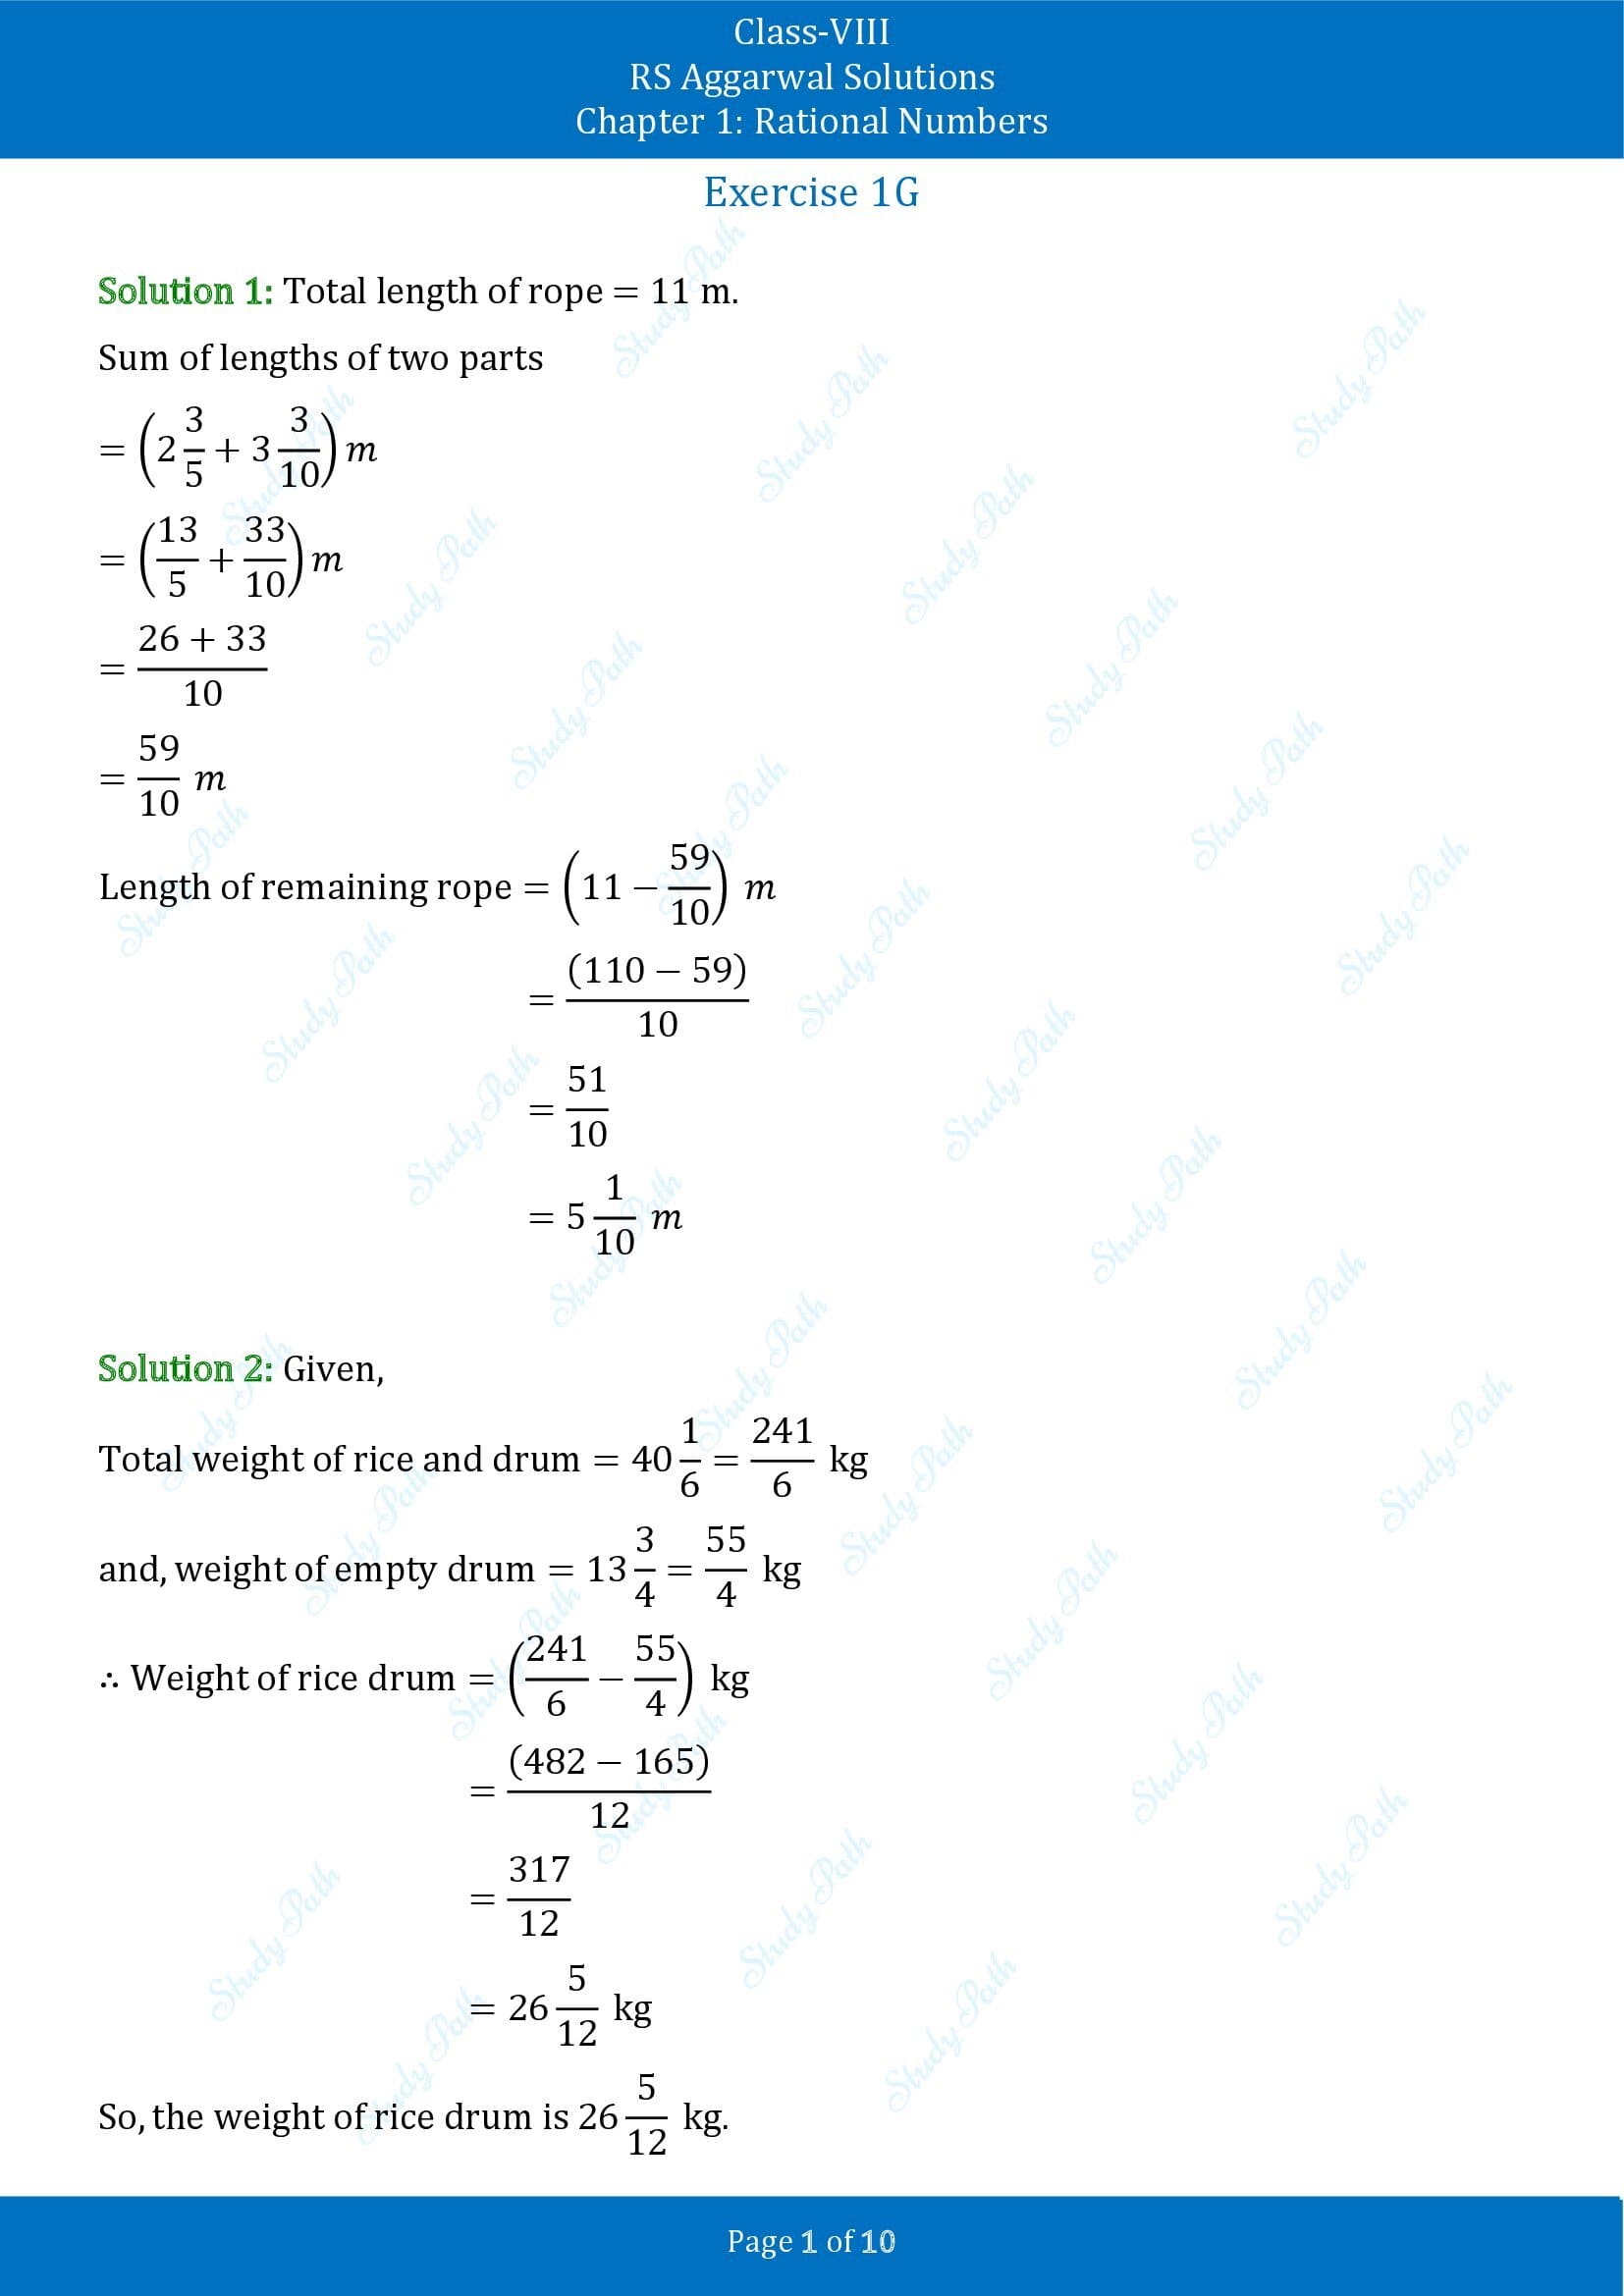 RS Aggarwal Solutions Class 8 Chapter 1 Rational Numbers Exercise 1G 00001